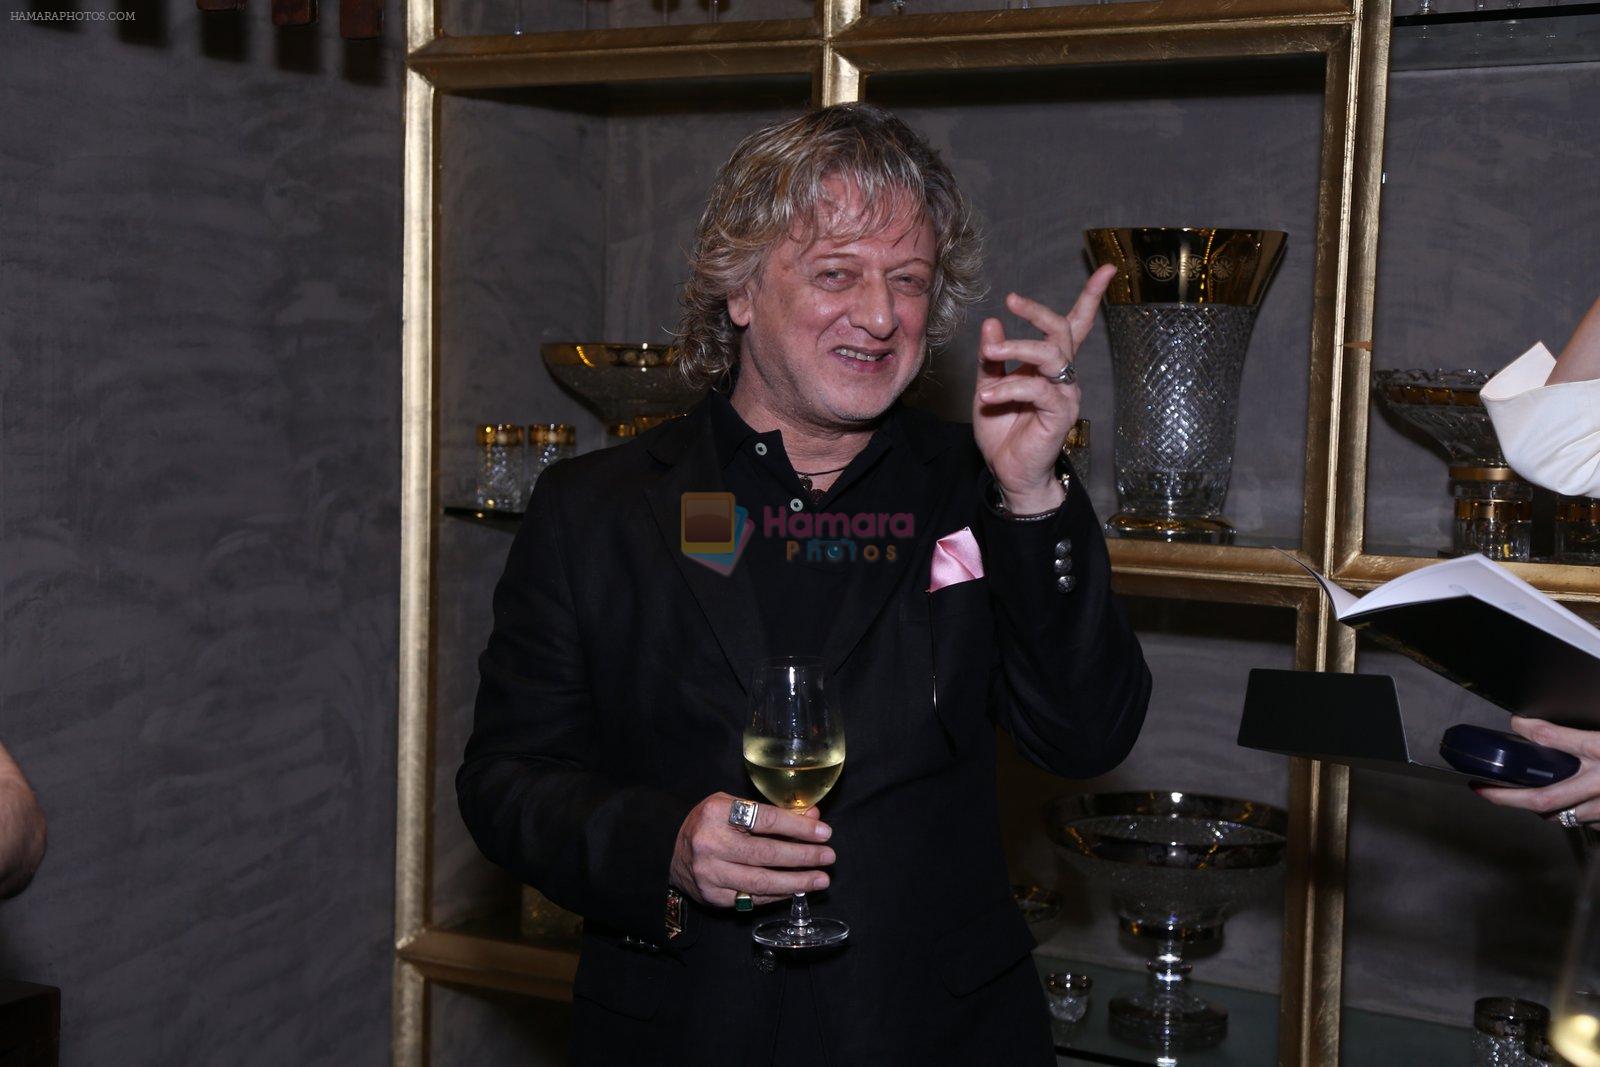 Rohit Bal at the launch of Rohit Bal crystals on 22nd Oct 2016